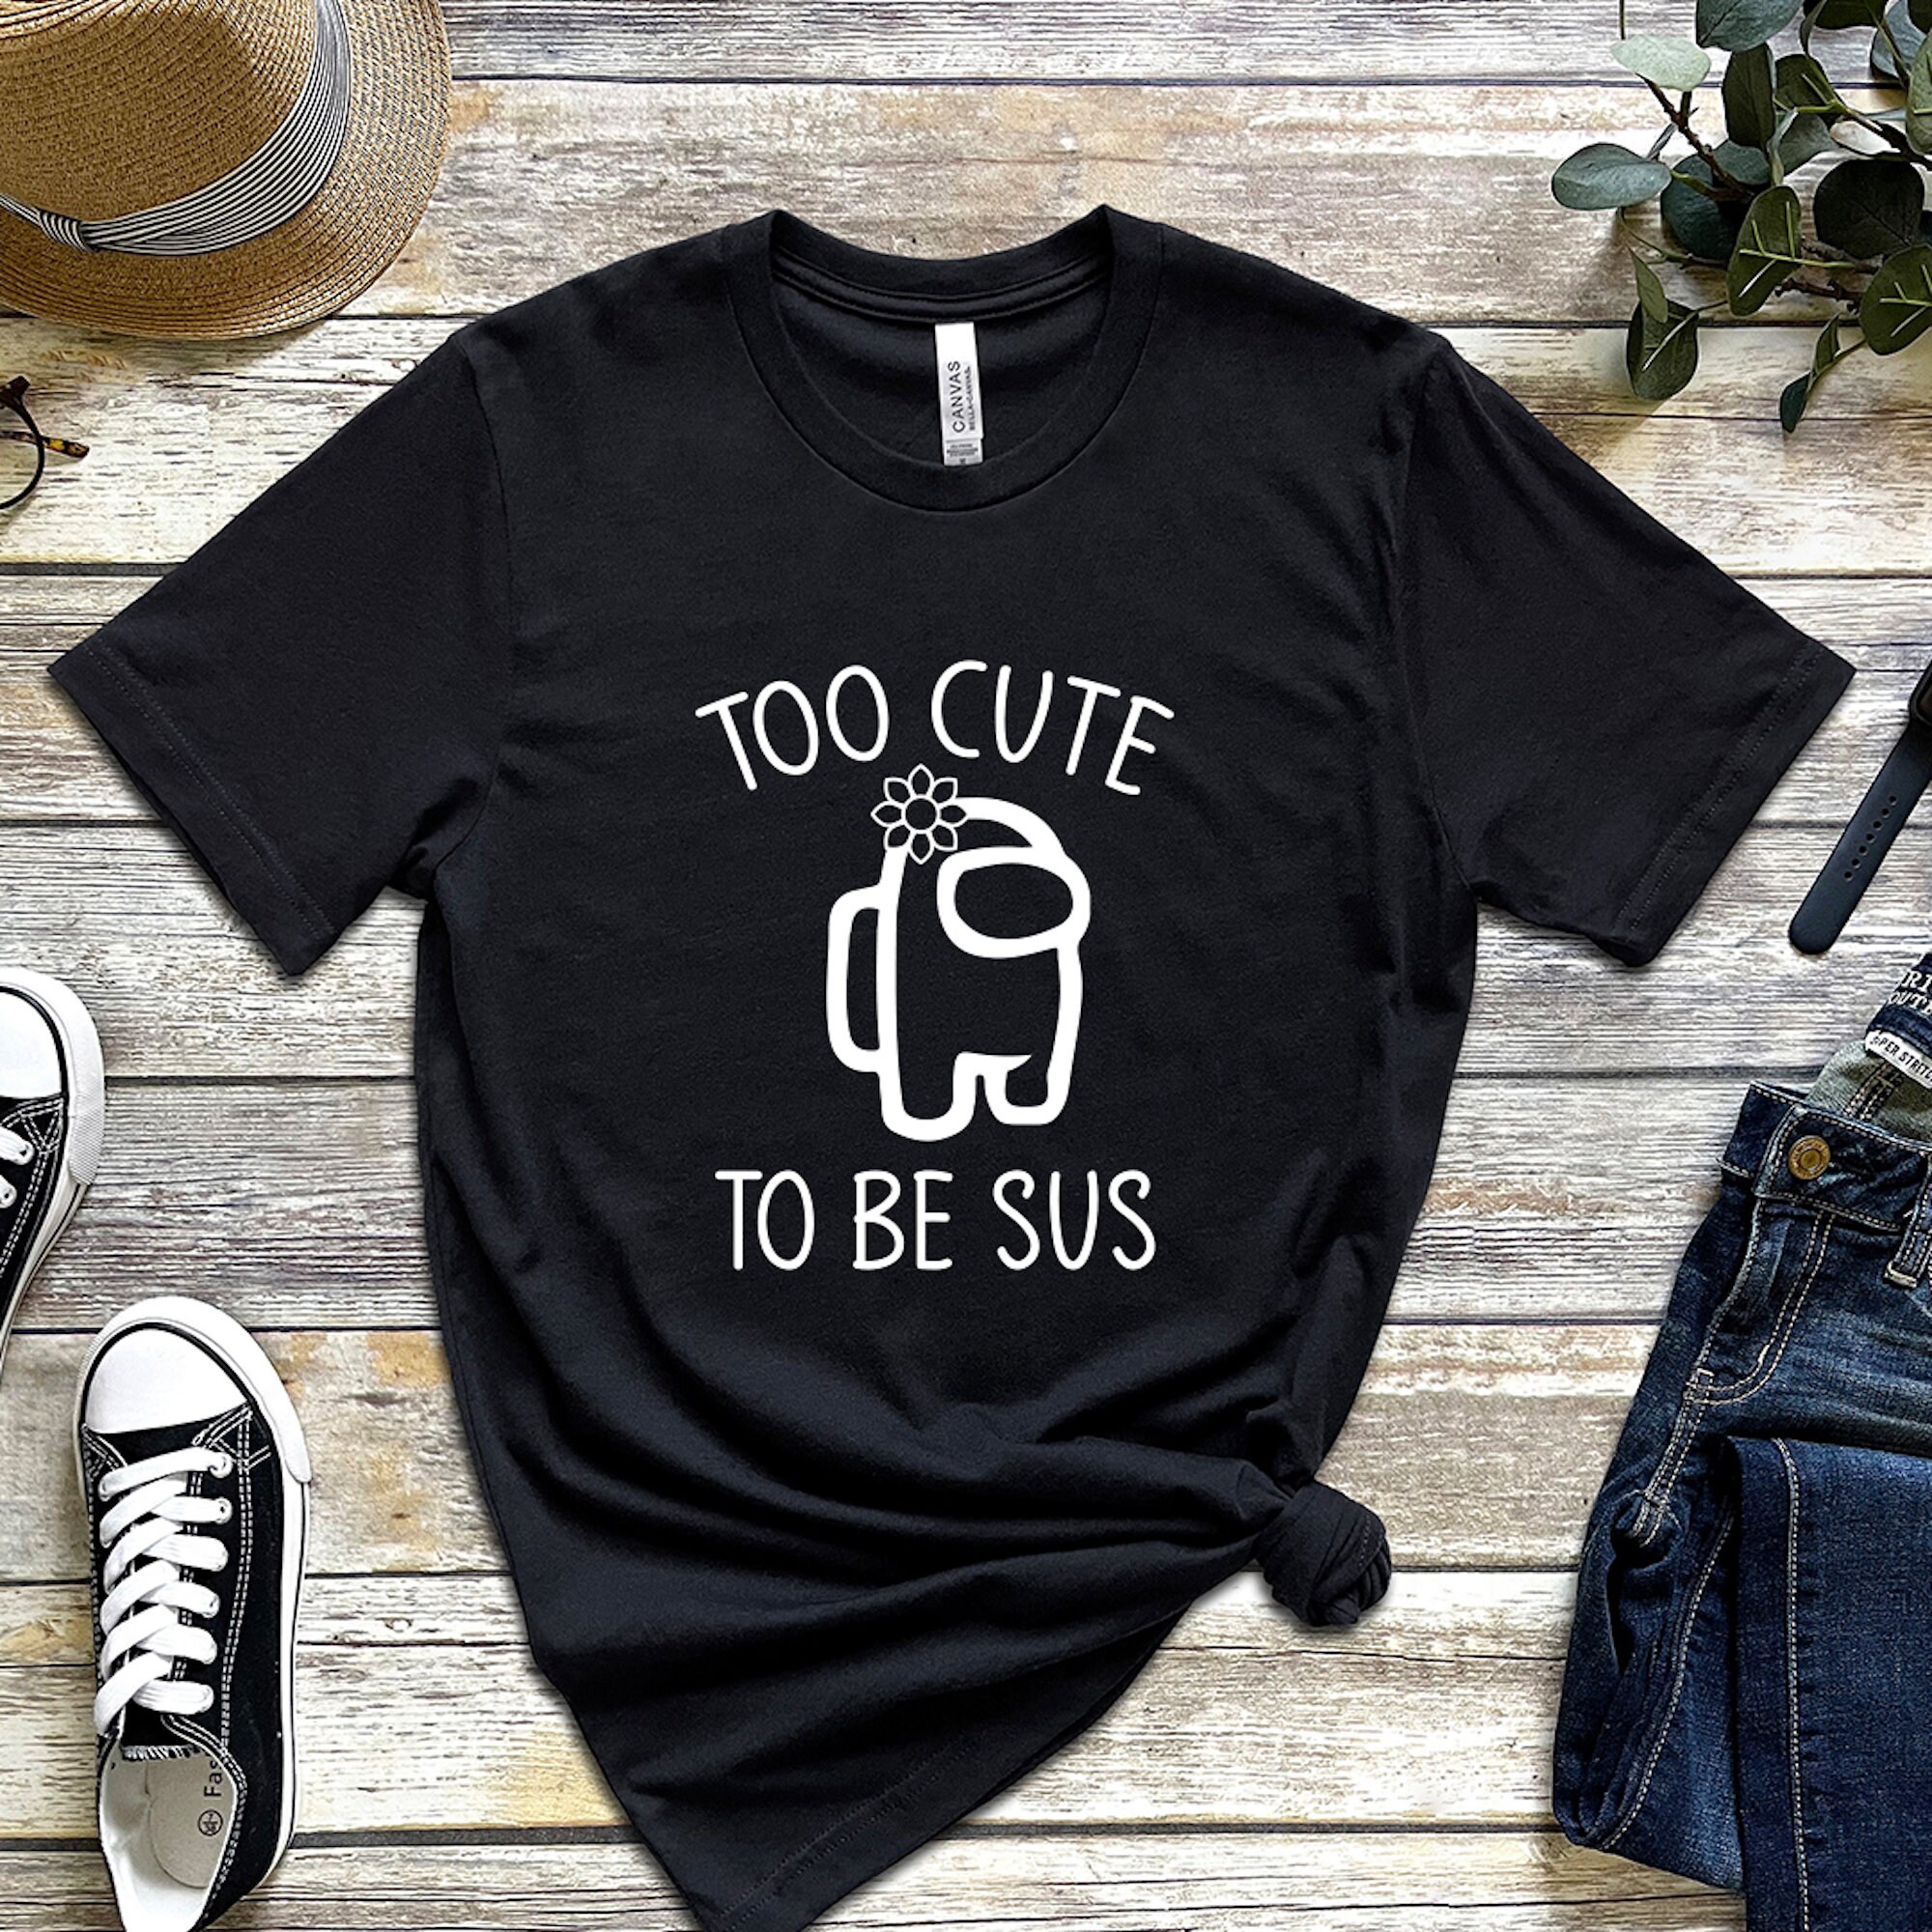 Discover Too Cute To Be Sus T-Shirt, Funny Among Us Shirt, Imposter T-shirt, You Look, Lover Gamer, Gameday Tee, Gift For Friend, Present Birthday